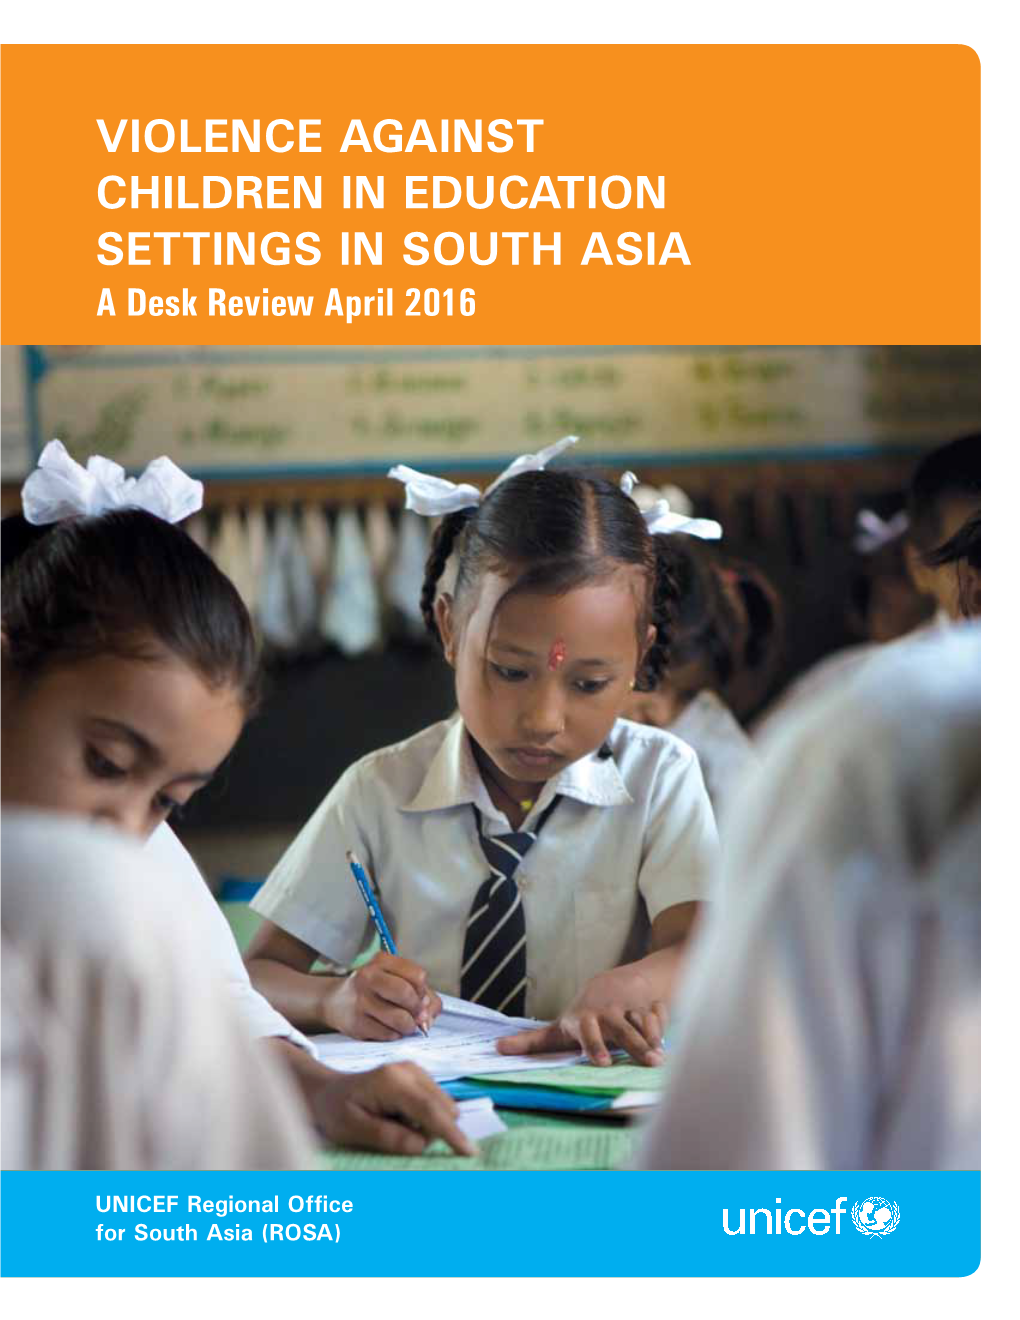 Violence AGAINST CHILDREN in EDUCATION SETTINGS in SOUTH ASIA a Desk Review April 2016